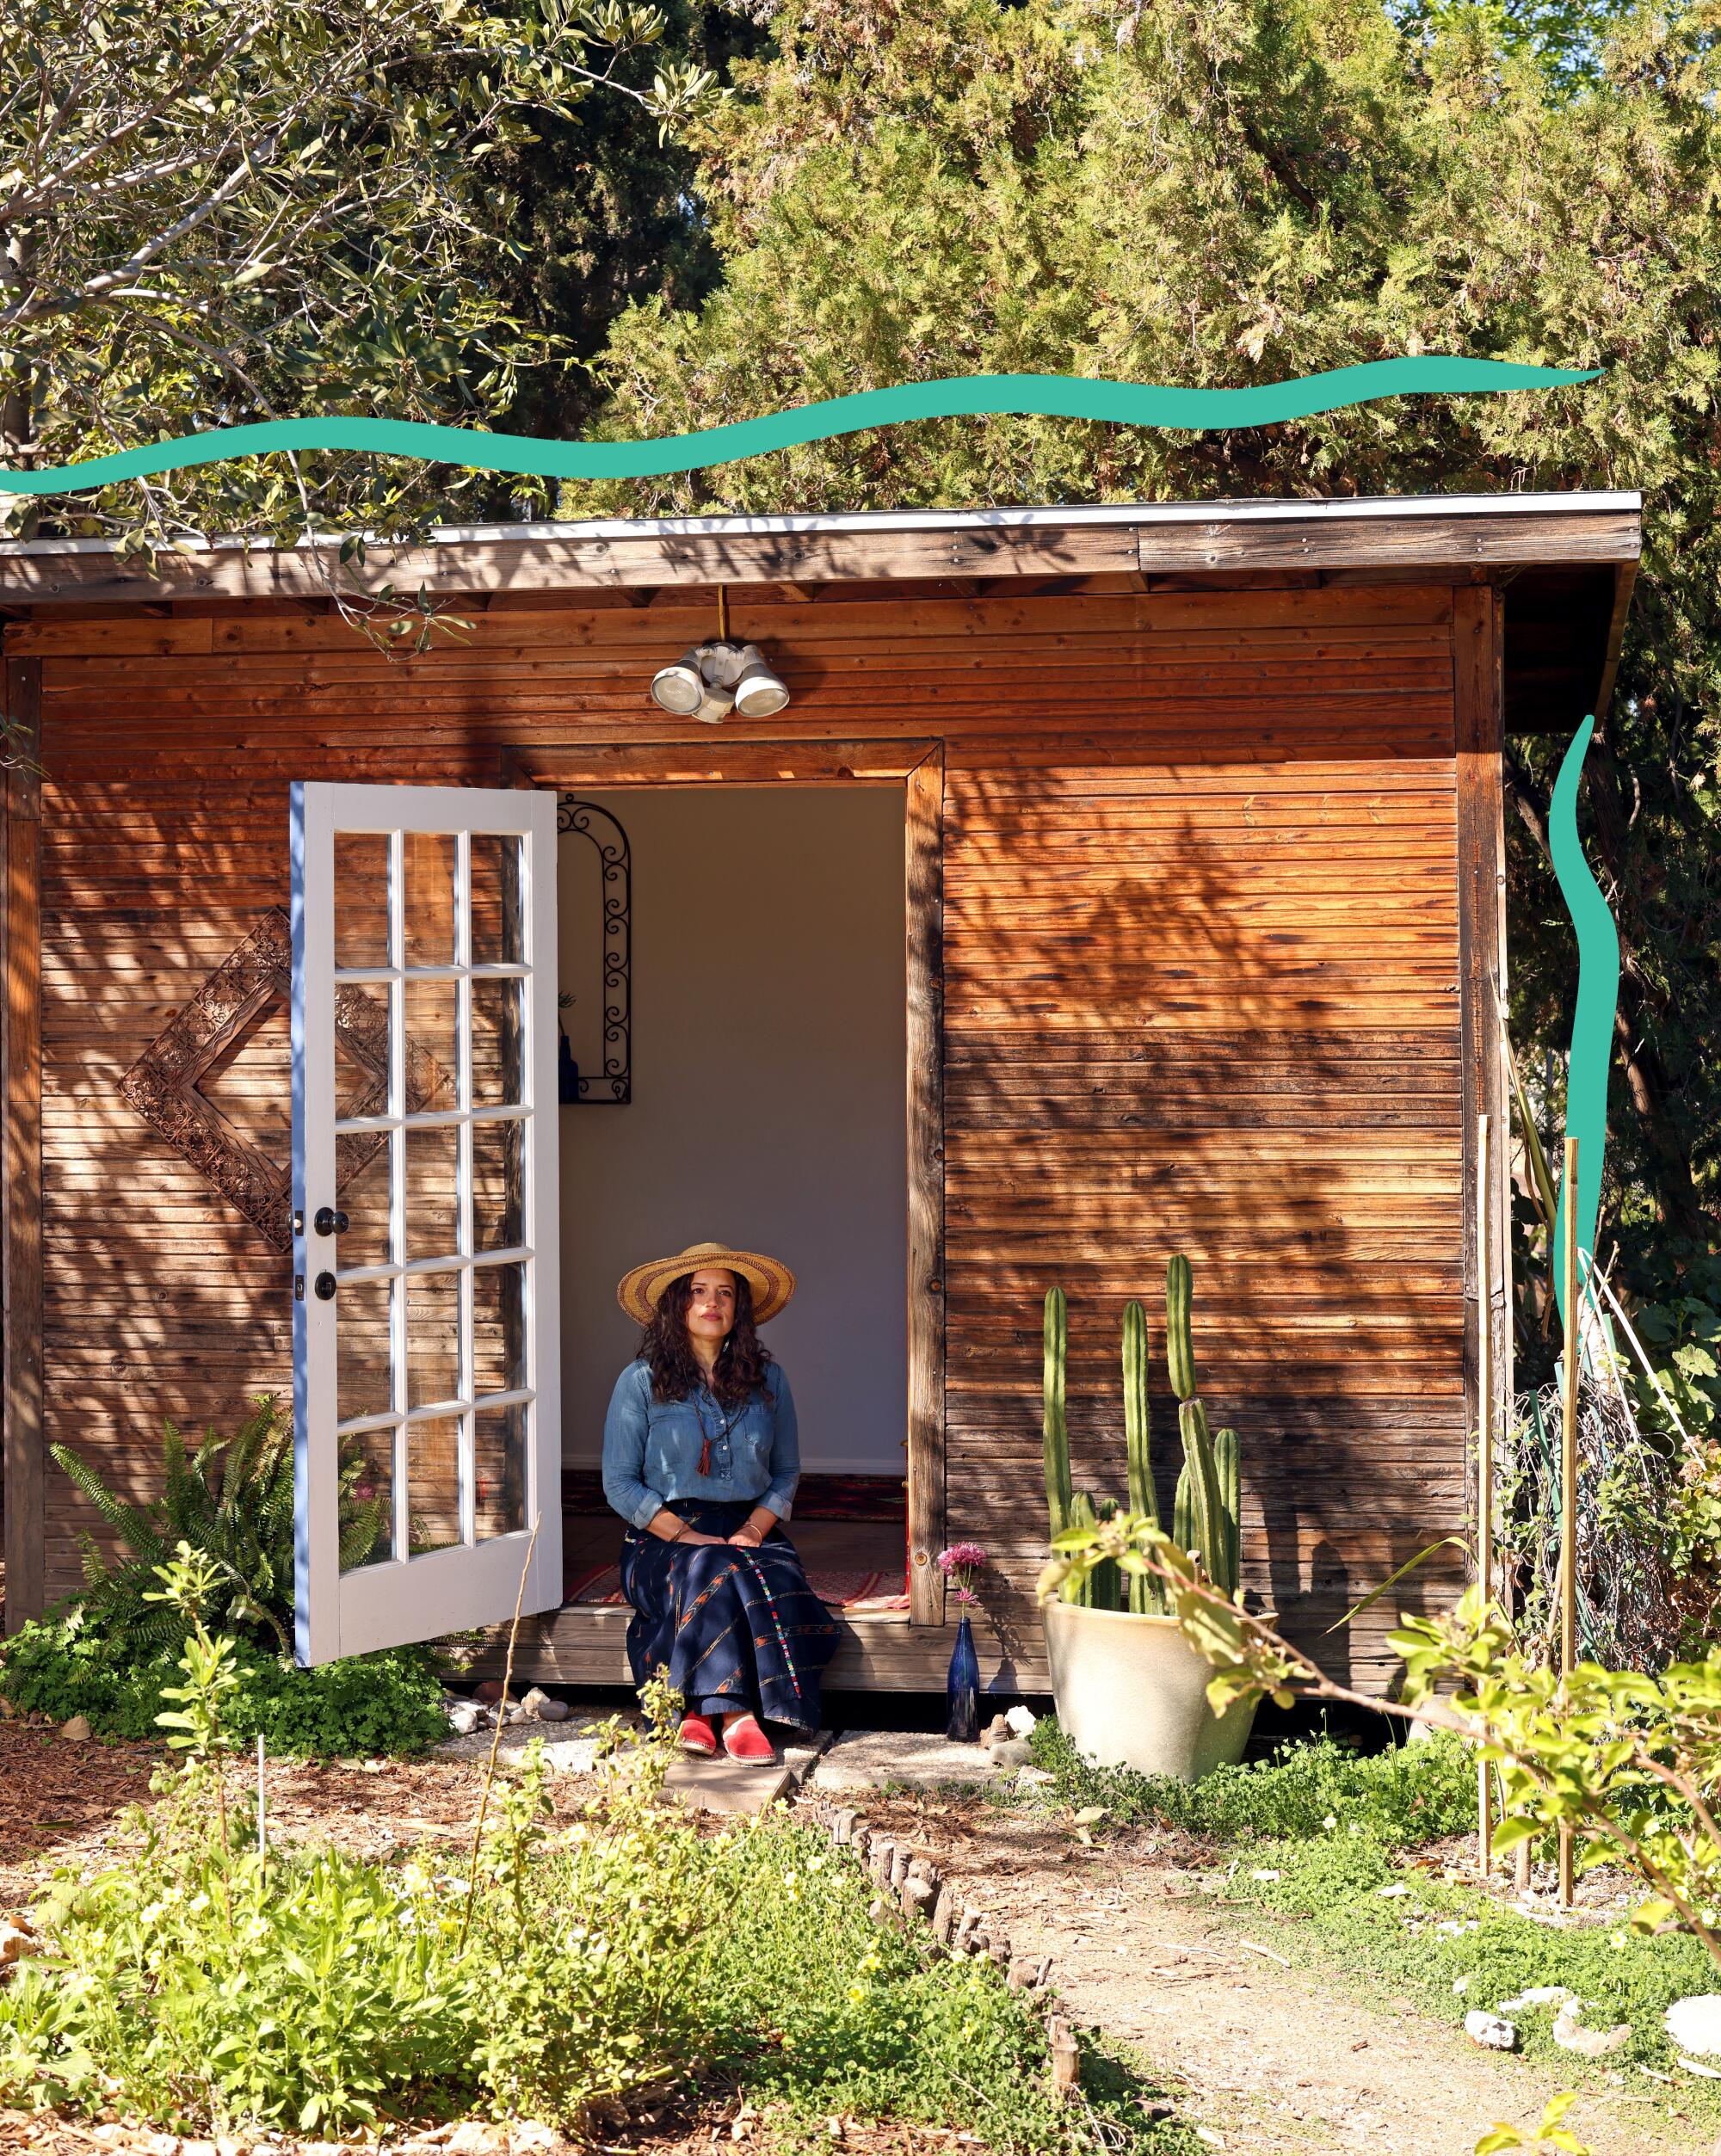 A woman sits in the open doorway of a small wooden building. 